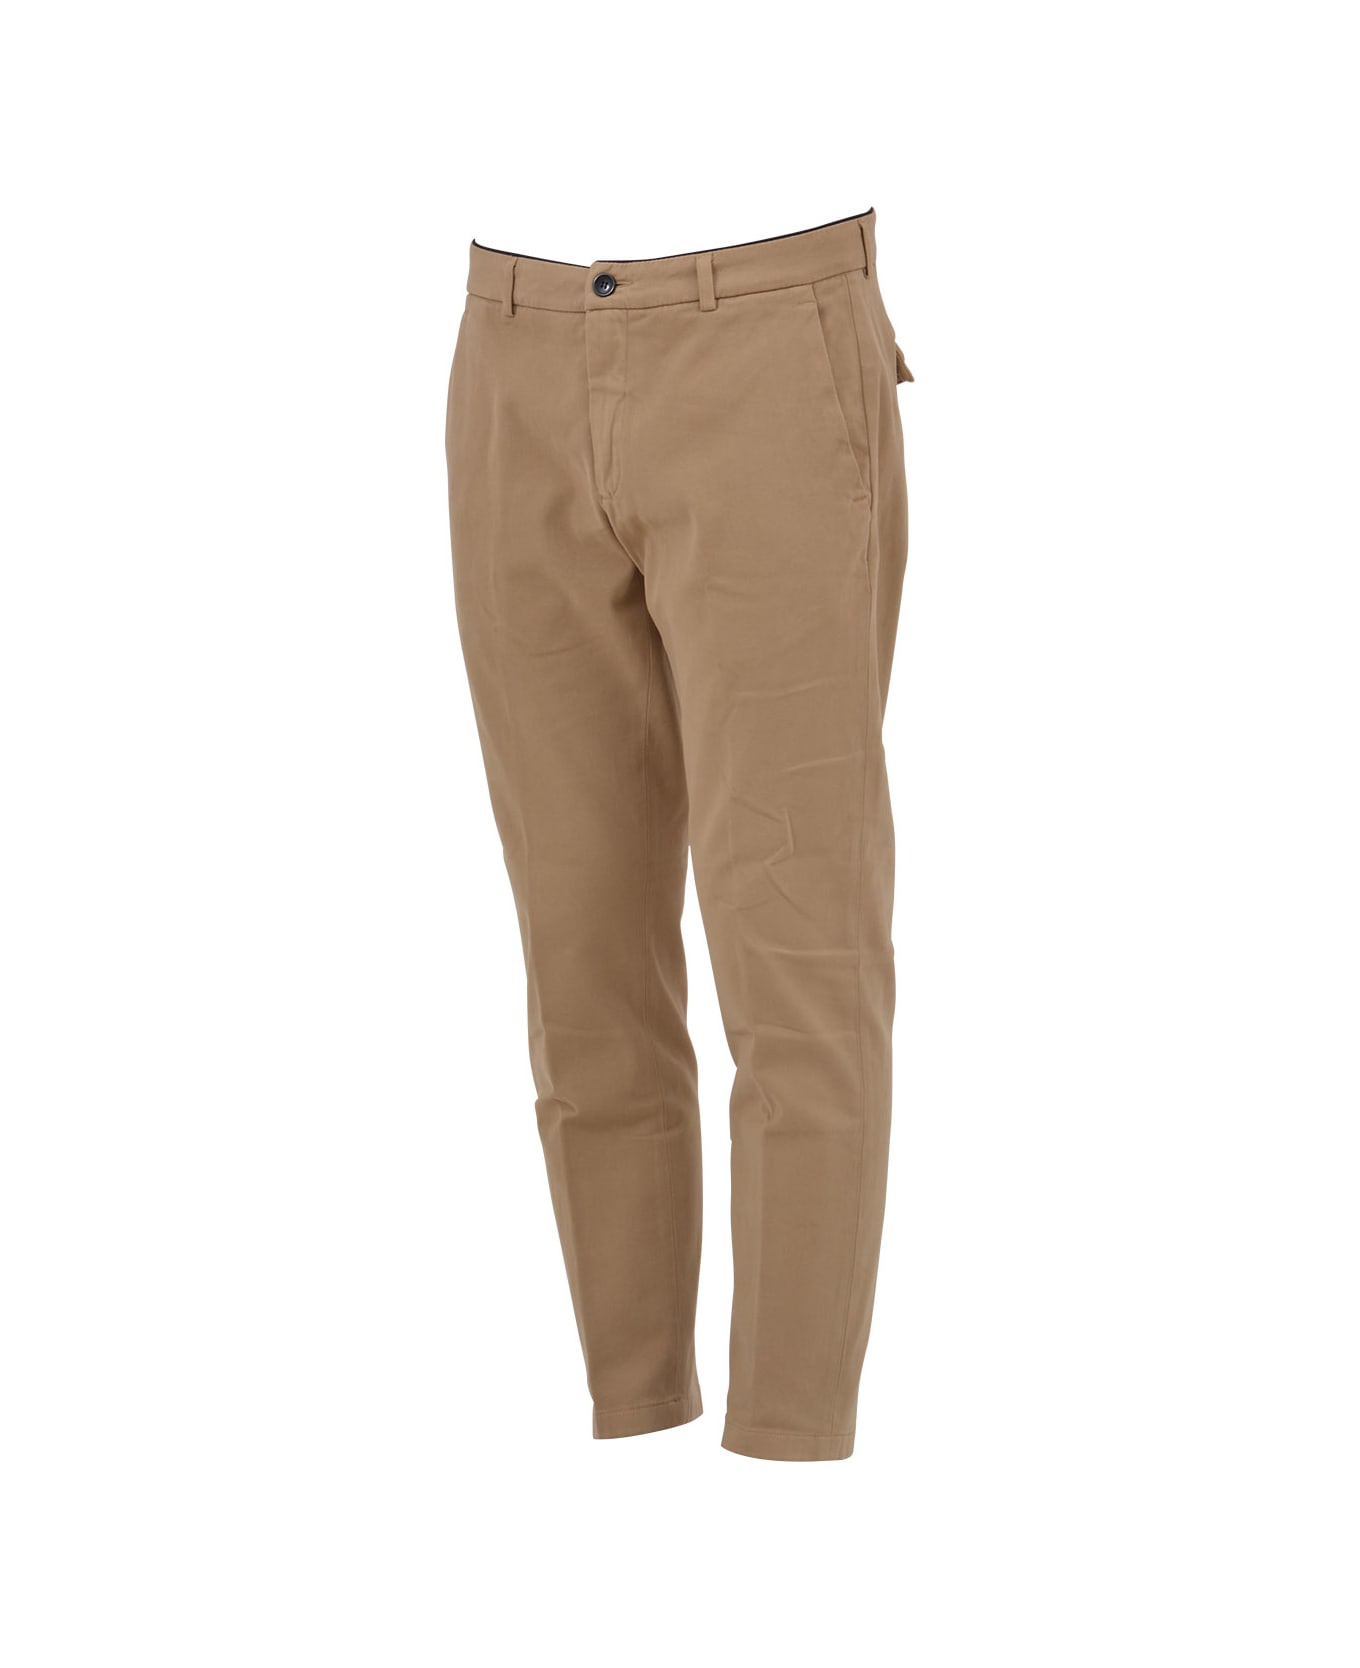 Department Five Chino Trousers - BEIGE ボトムス